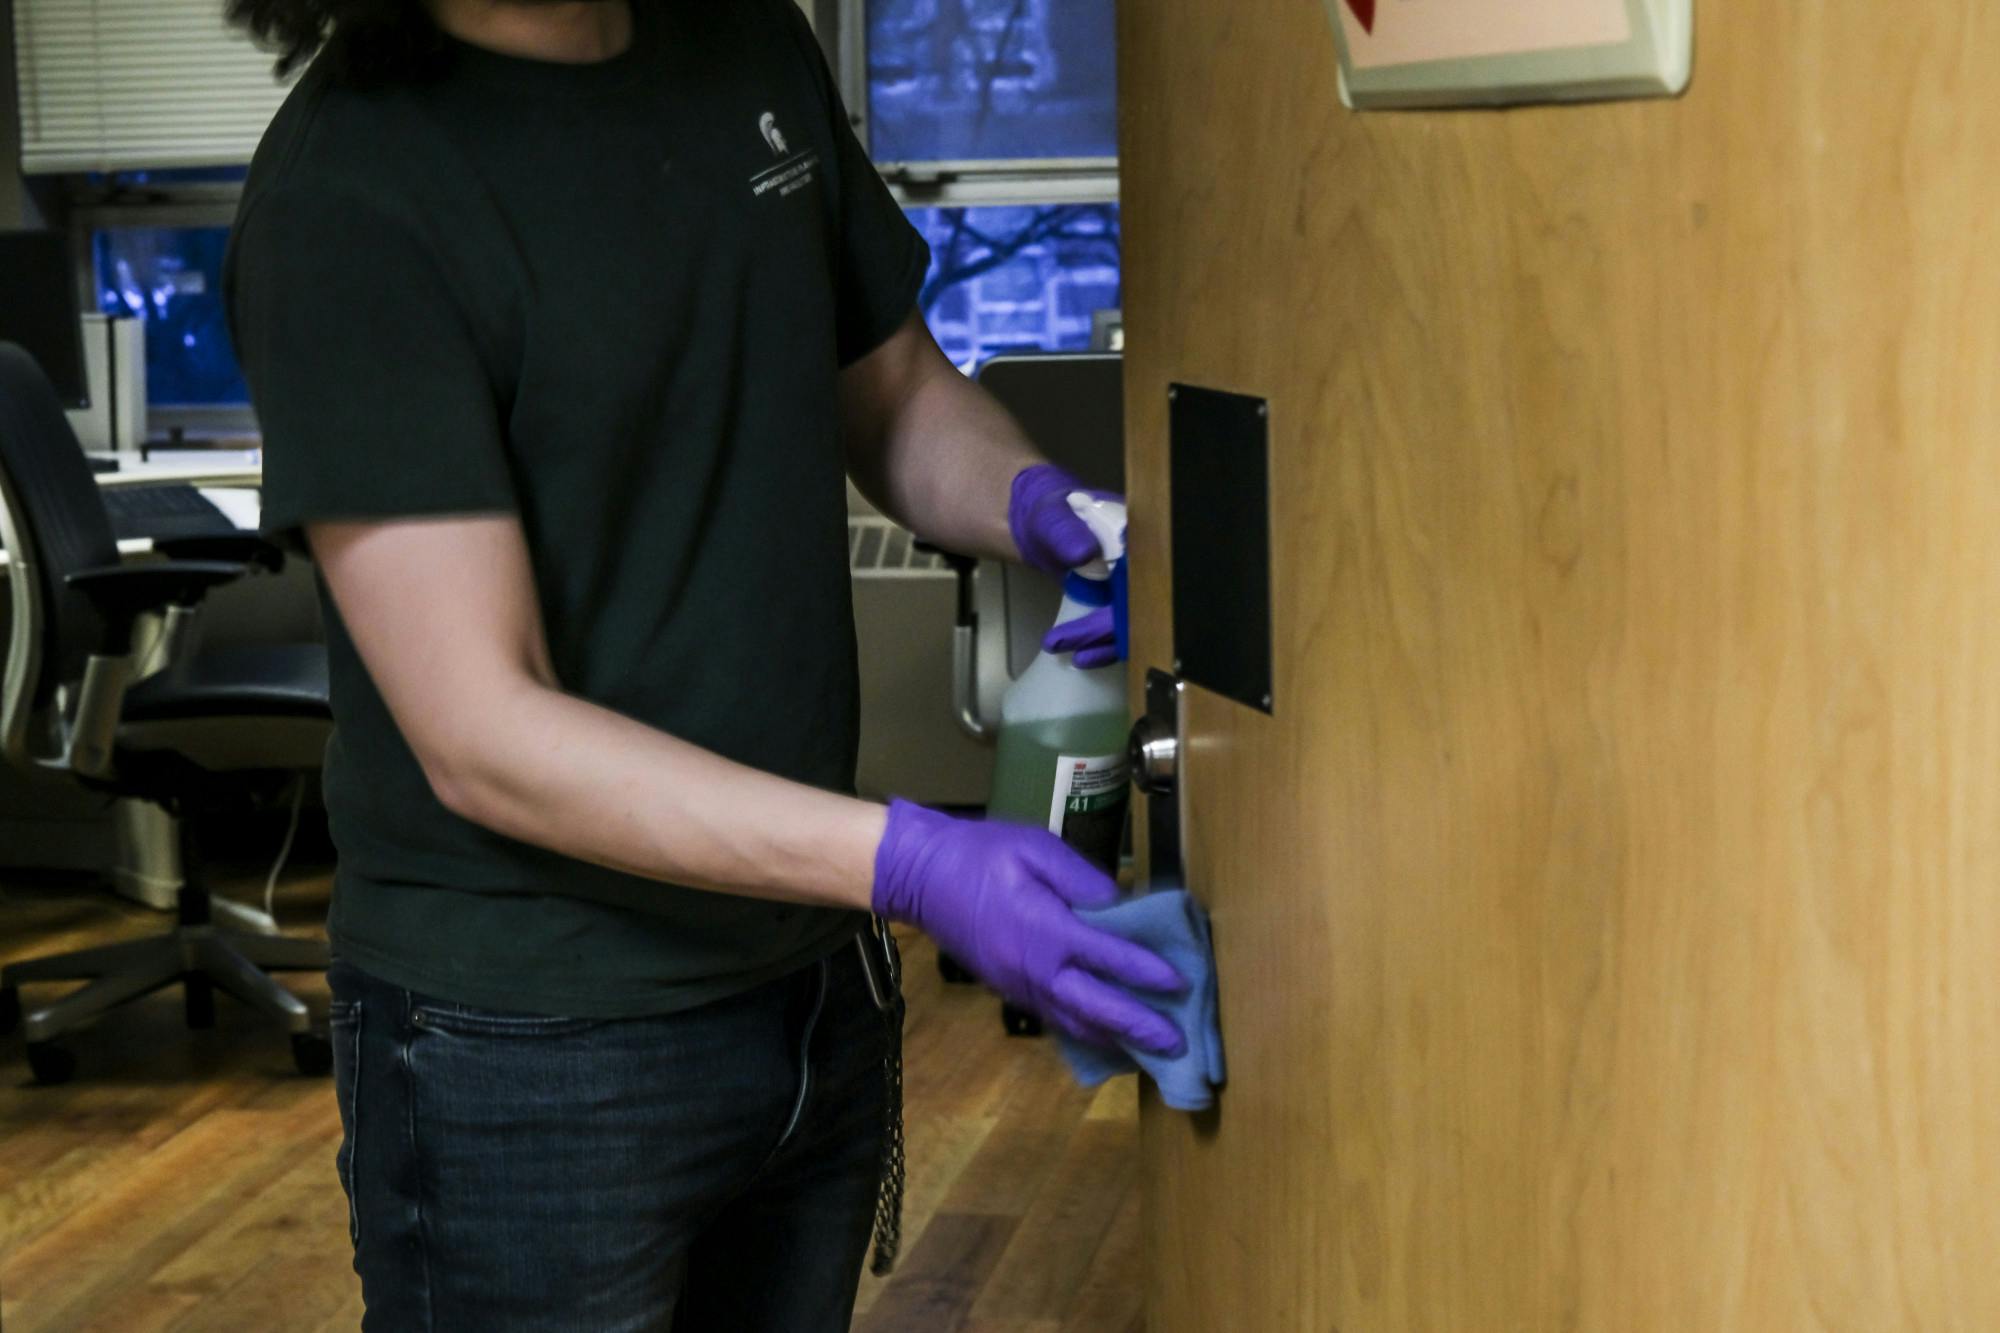 A person wearing purple medical gloves uses a rag to wipe down a doorhandle while holding a cleaning spray. The person's face is not visible.